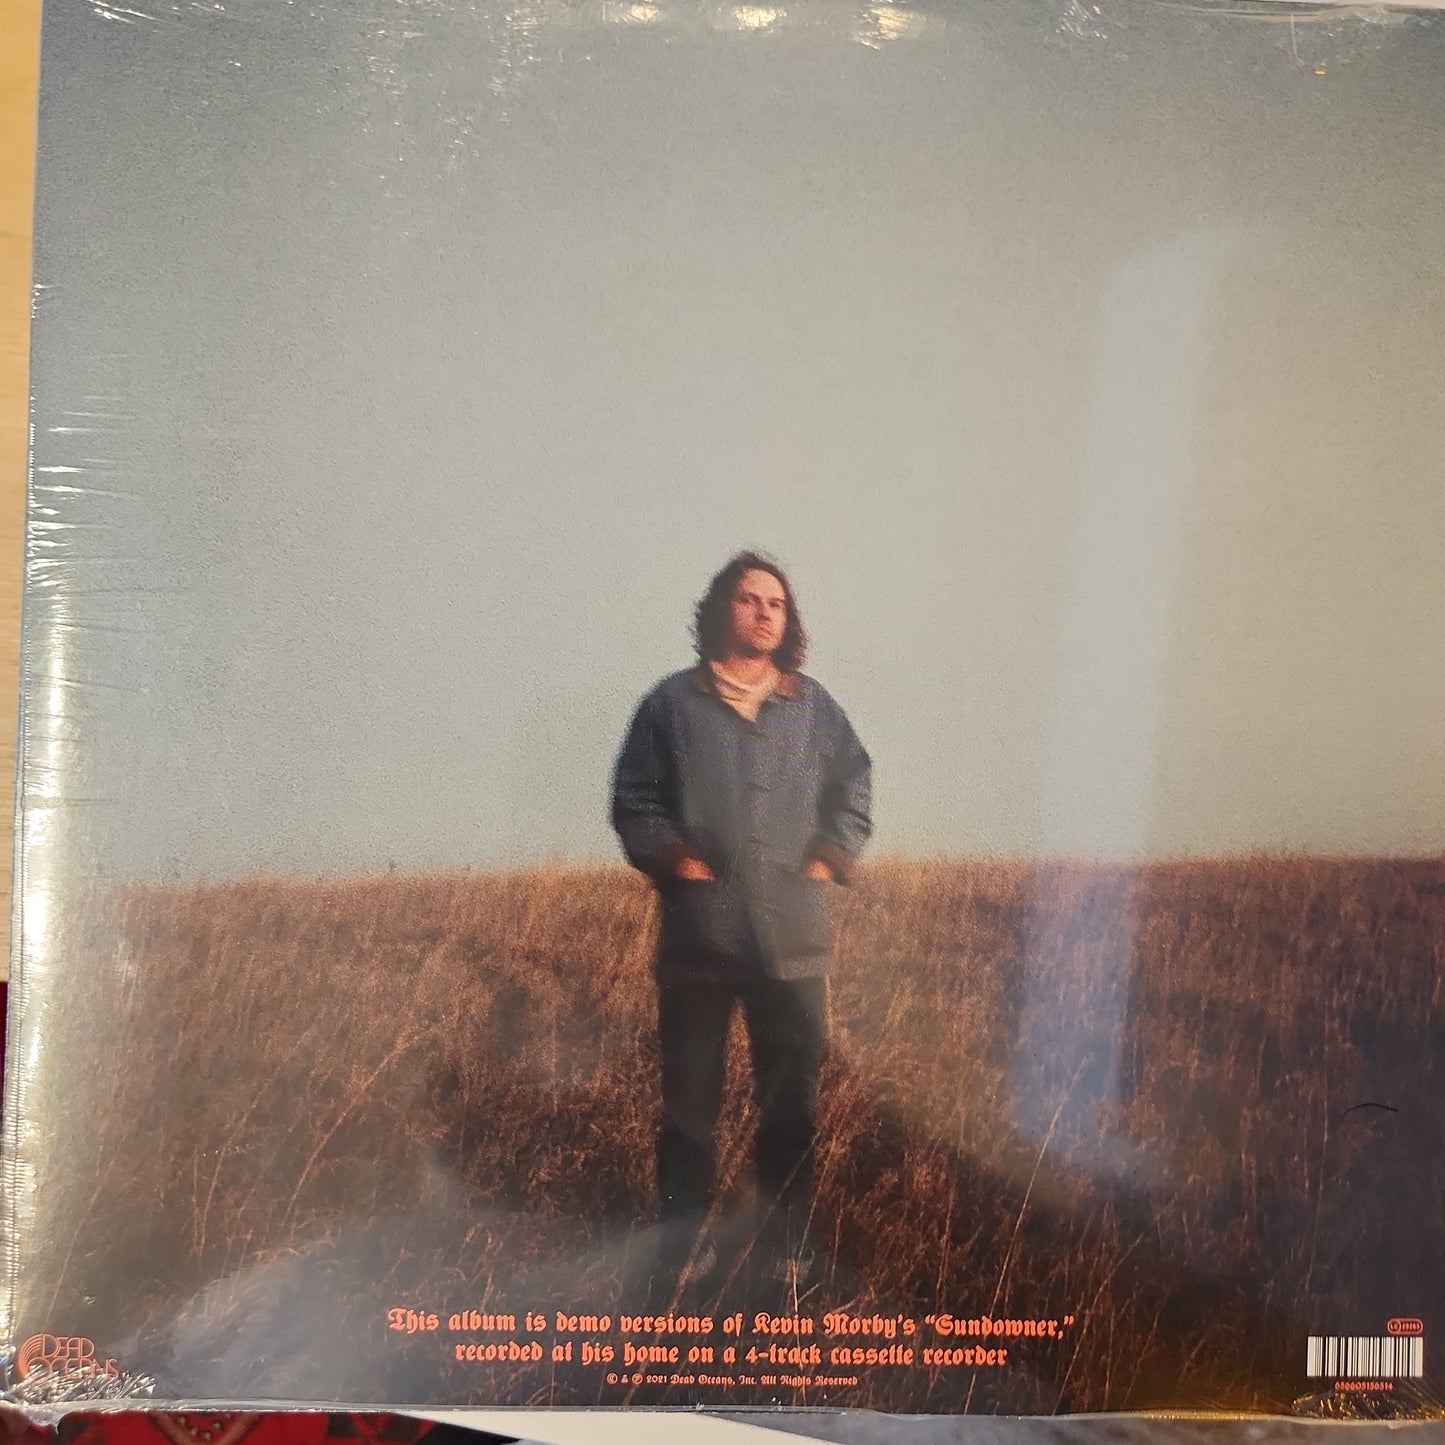 Kevin Morby - A night at the little Los Angeles - Vinyl LP